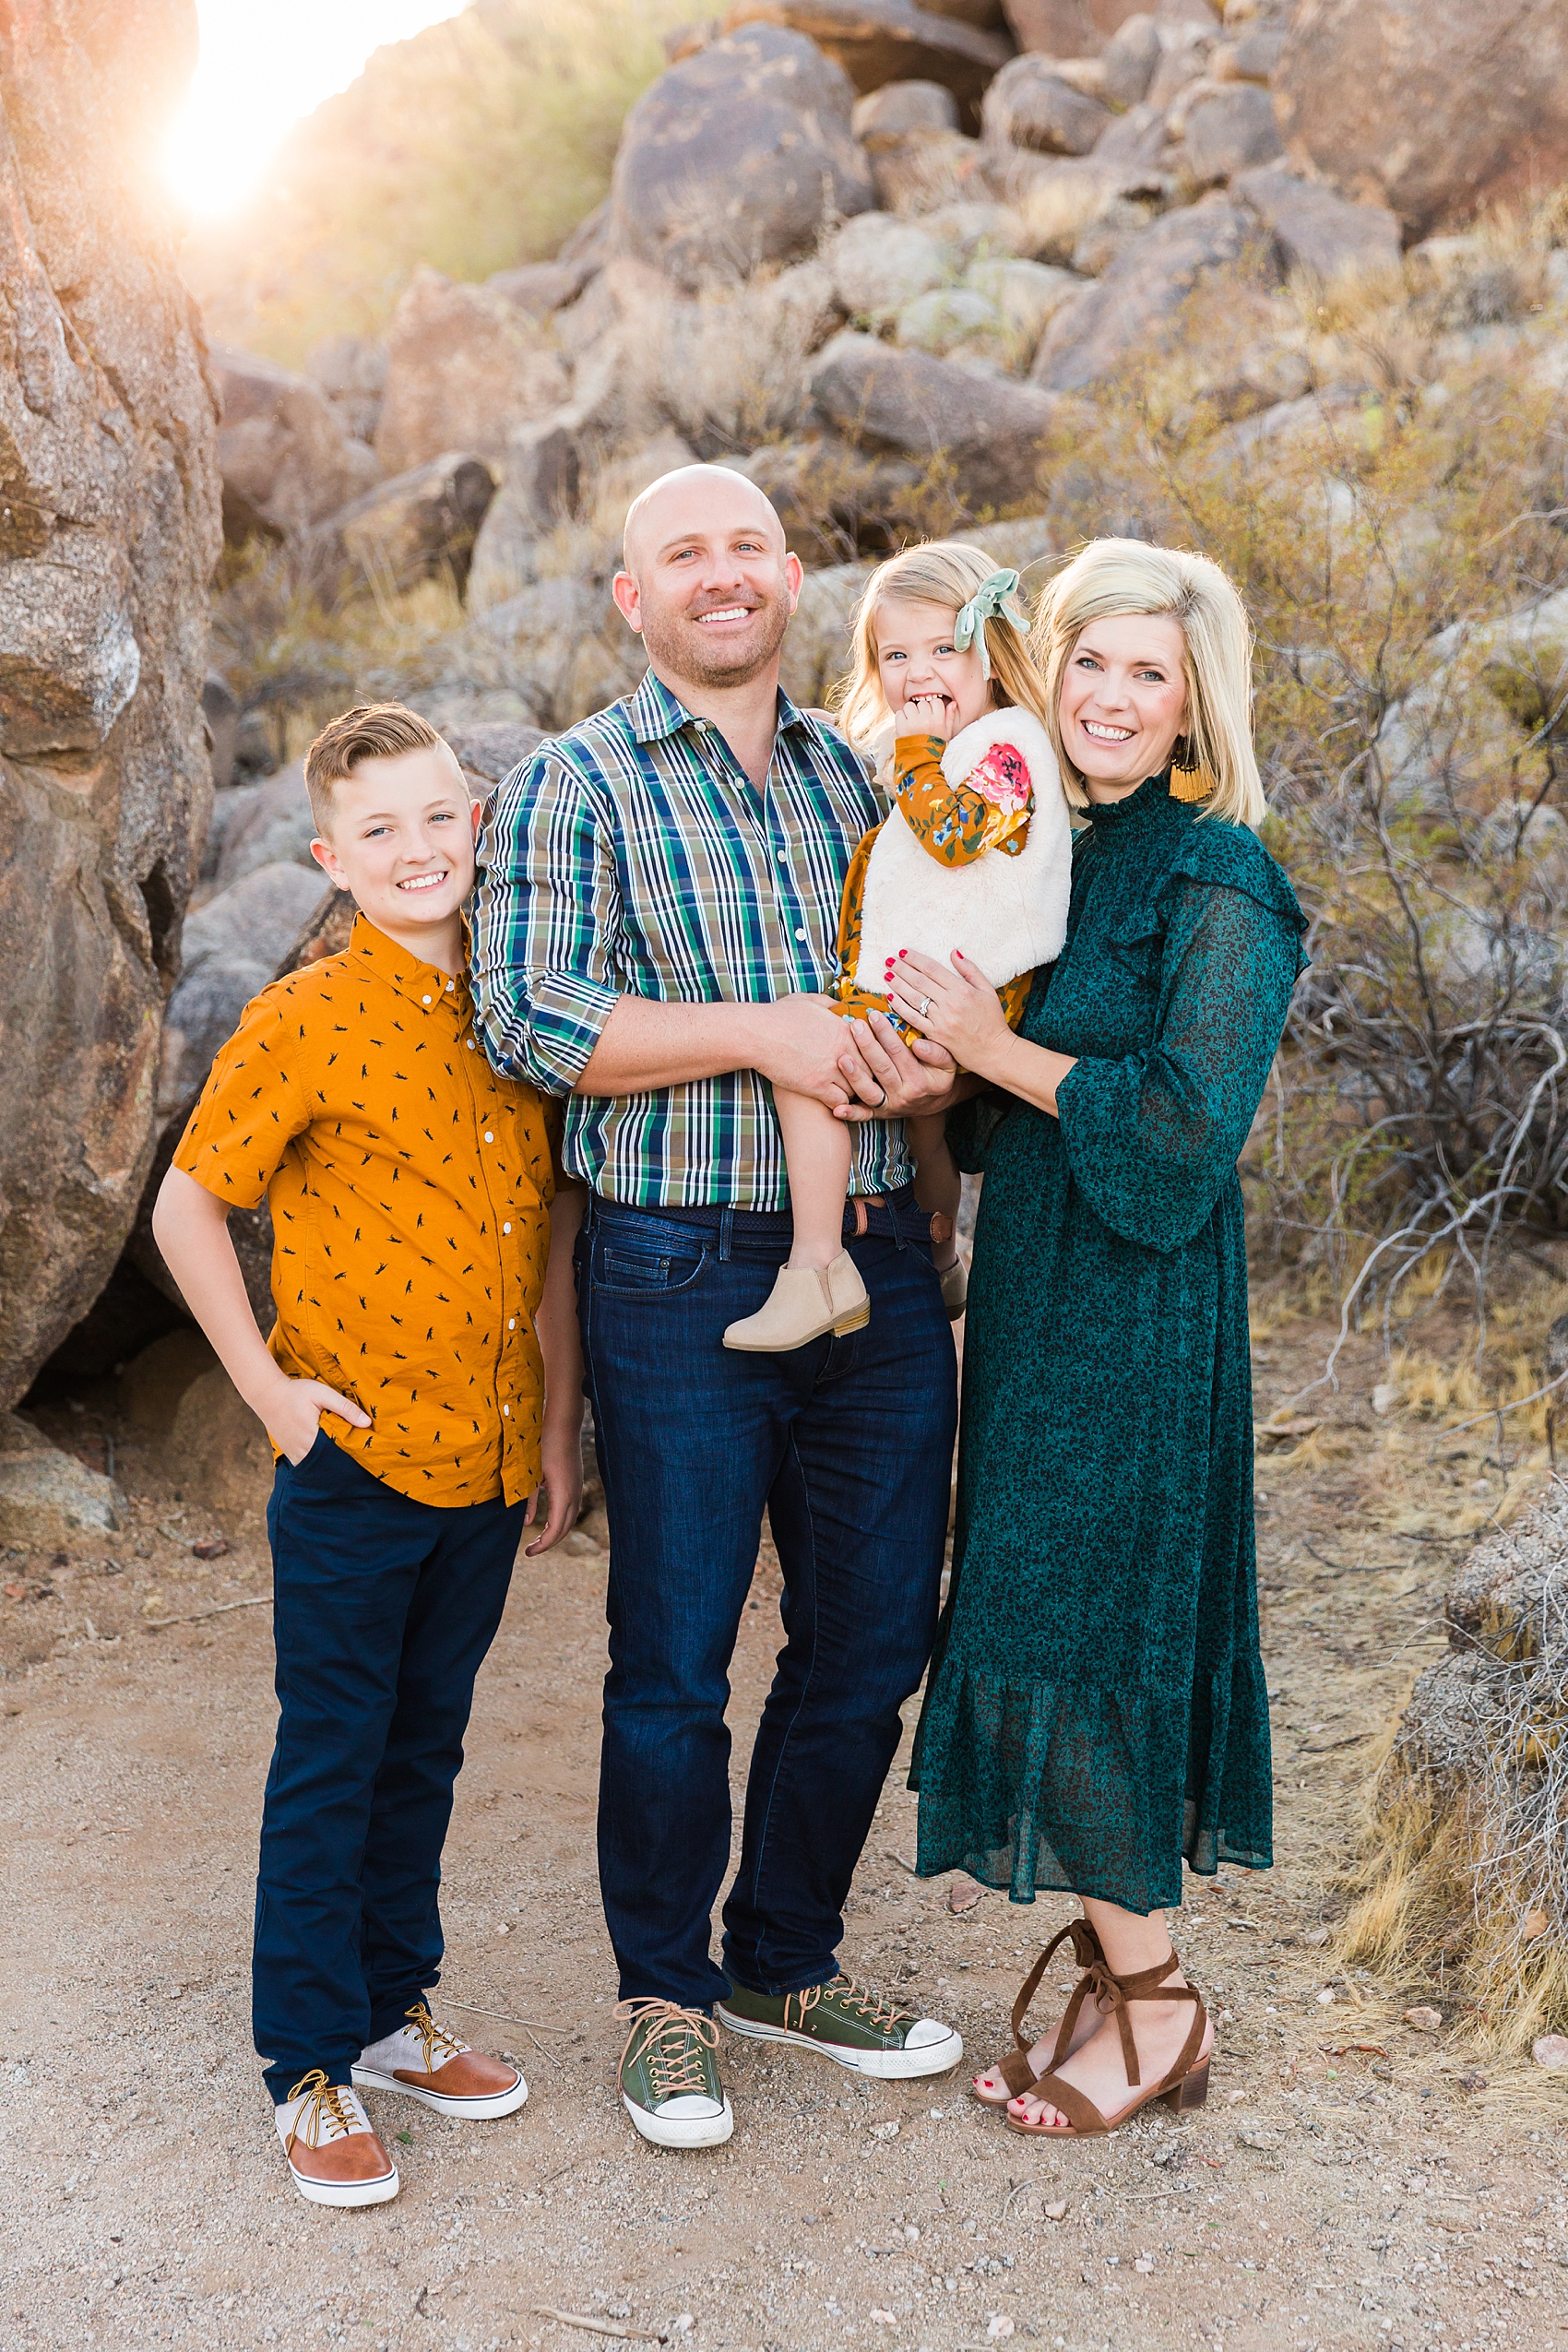 3 Styling Tips For Your Family Clients! - Leah Hope Photography - What to Wear | Family Photo Shoot Outfit Inspiration | How to Dress | Styling | Families | Family Photography | Family Fashion 